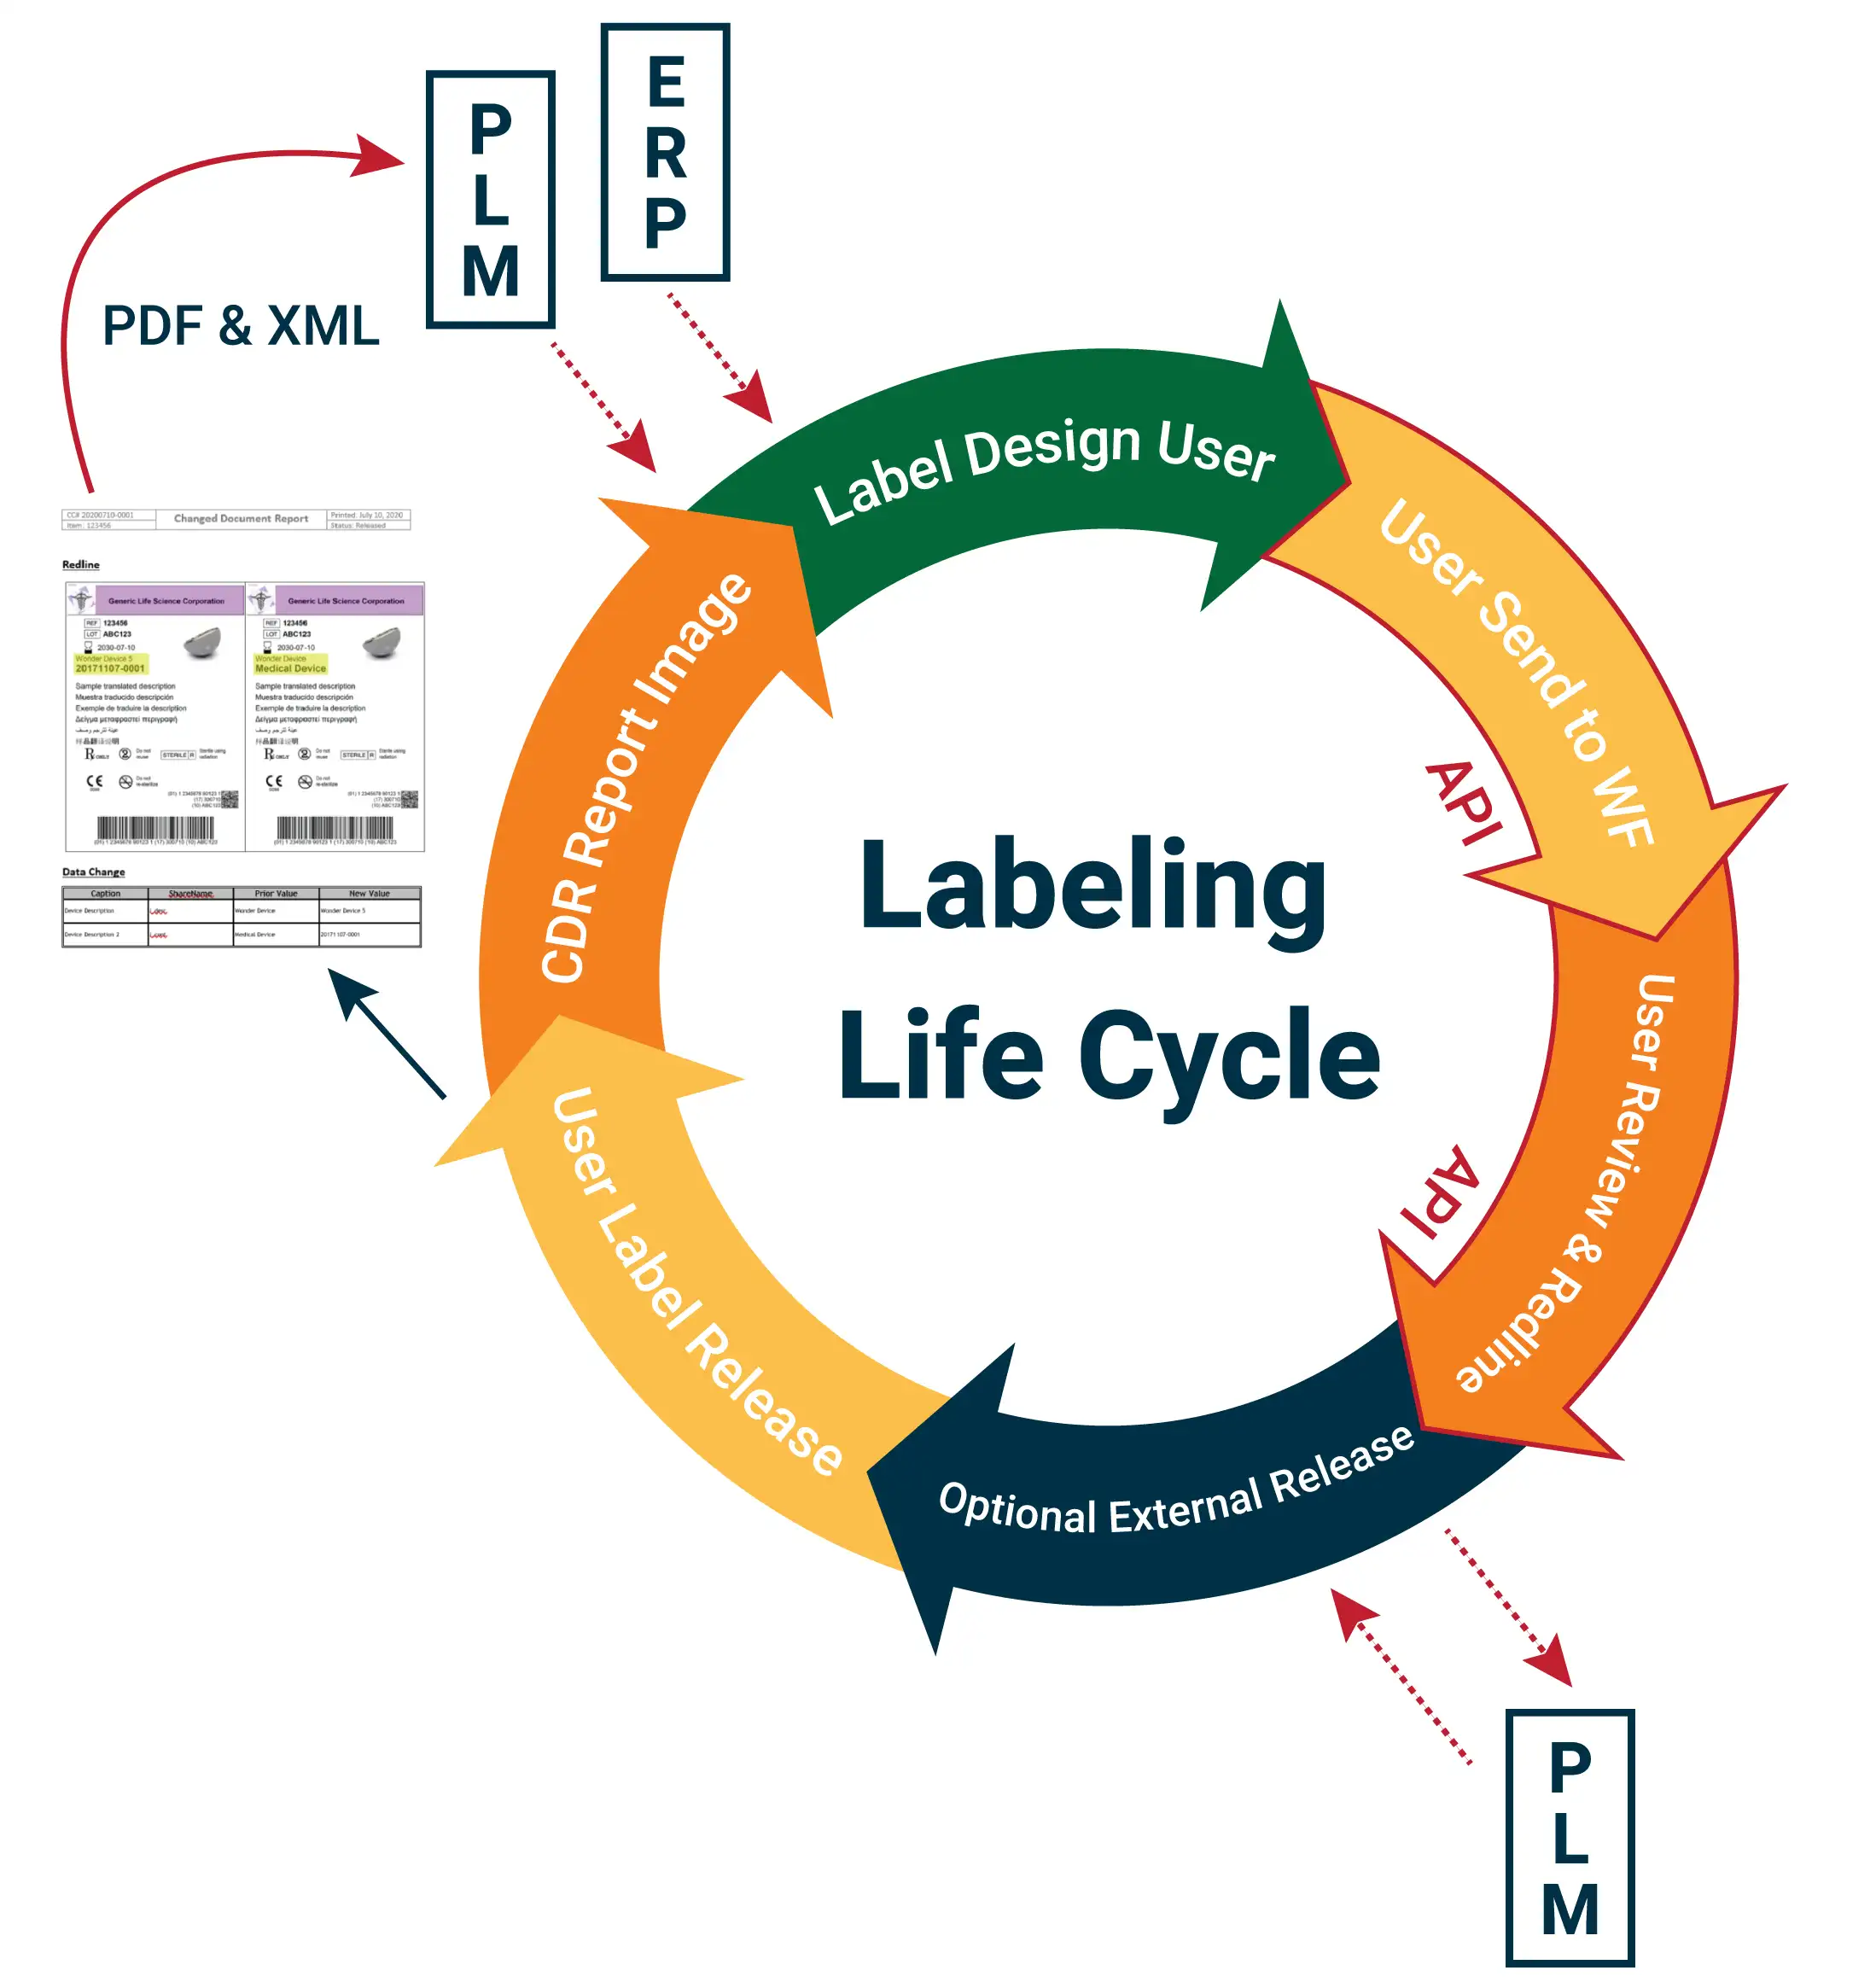 Labeling Lifecycle